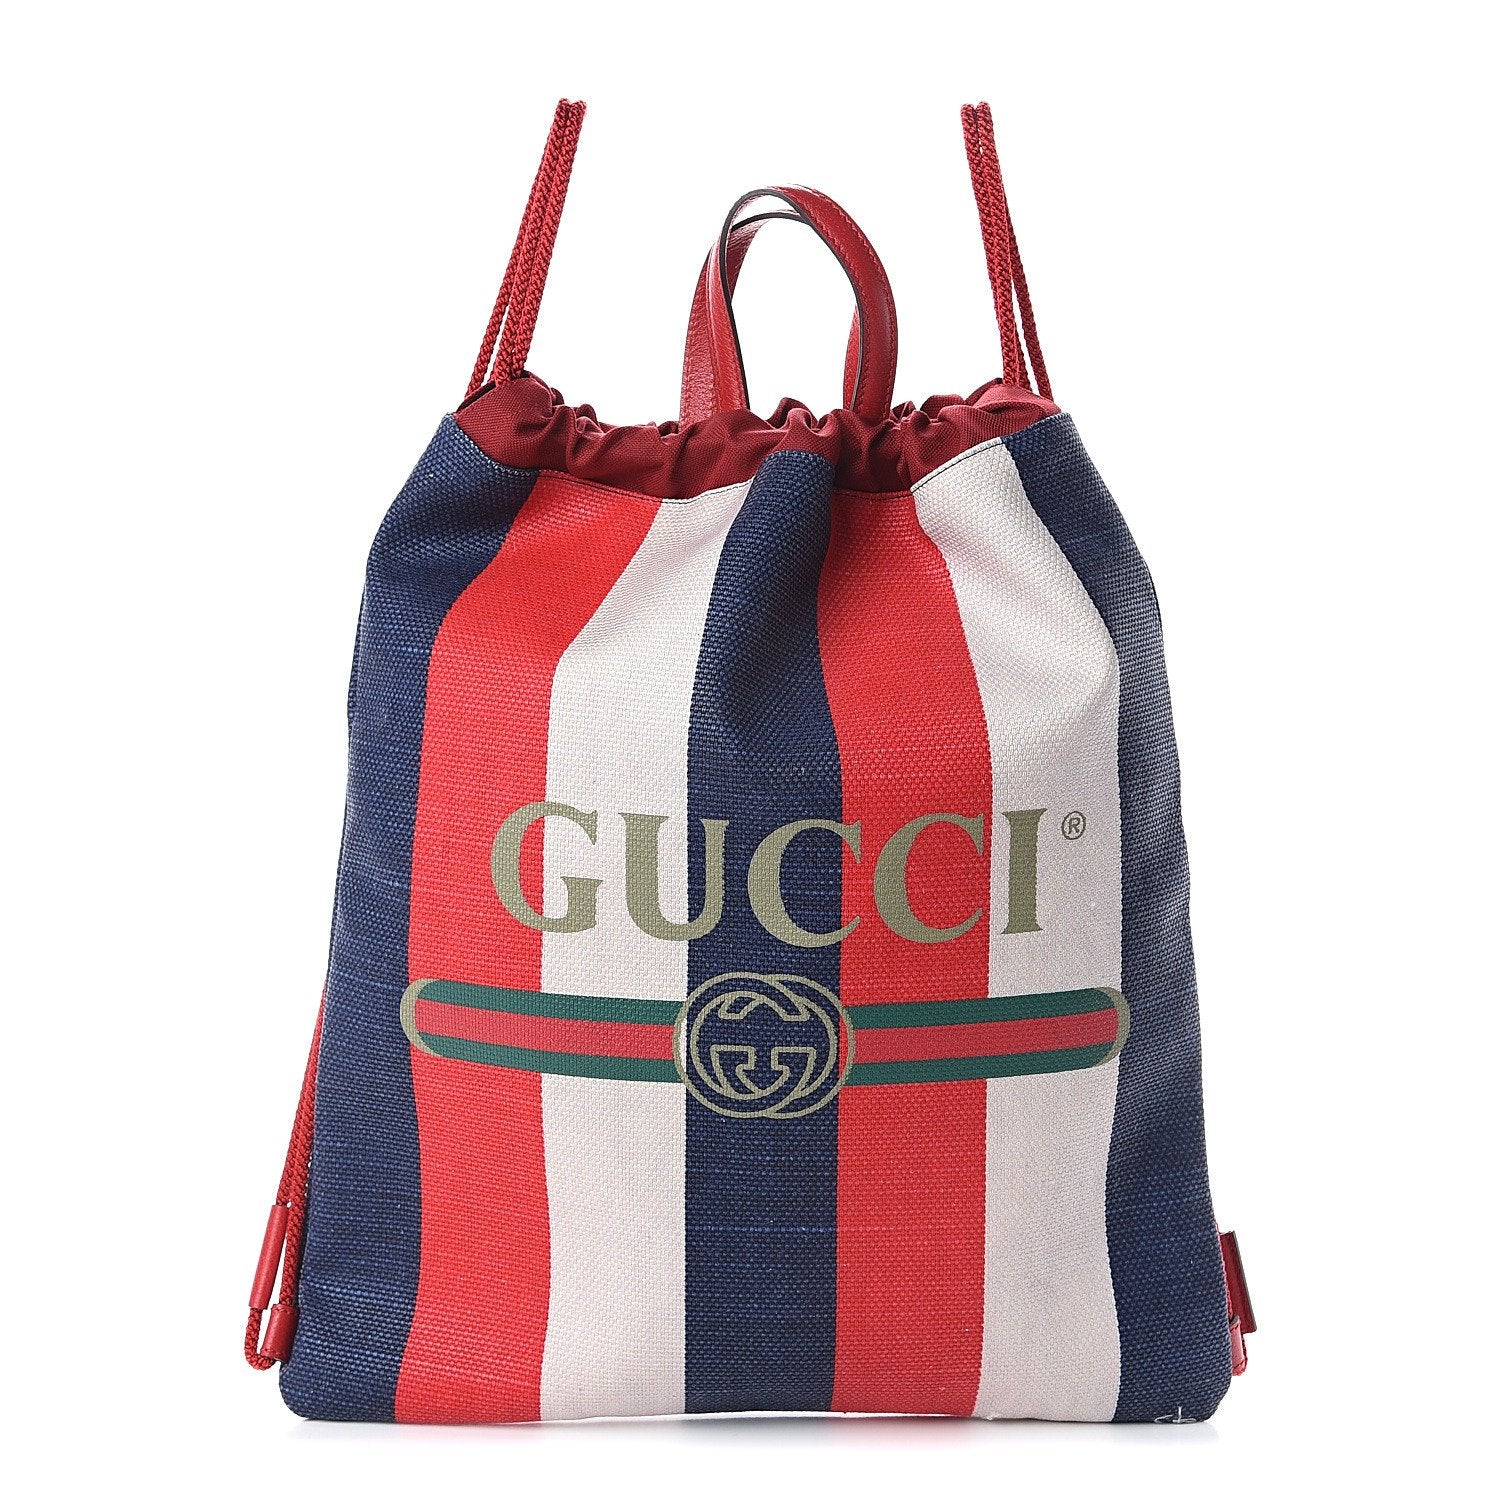 Gucci Zaino Multicolor Canvas Striped Drawstring Tote Backpack 473872 at_Queen_Bee_of_Beverly_Hills